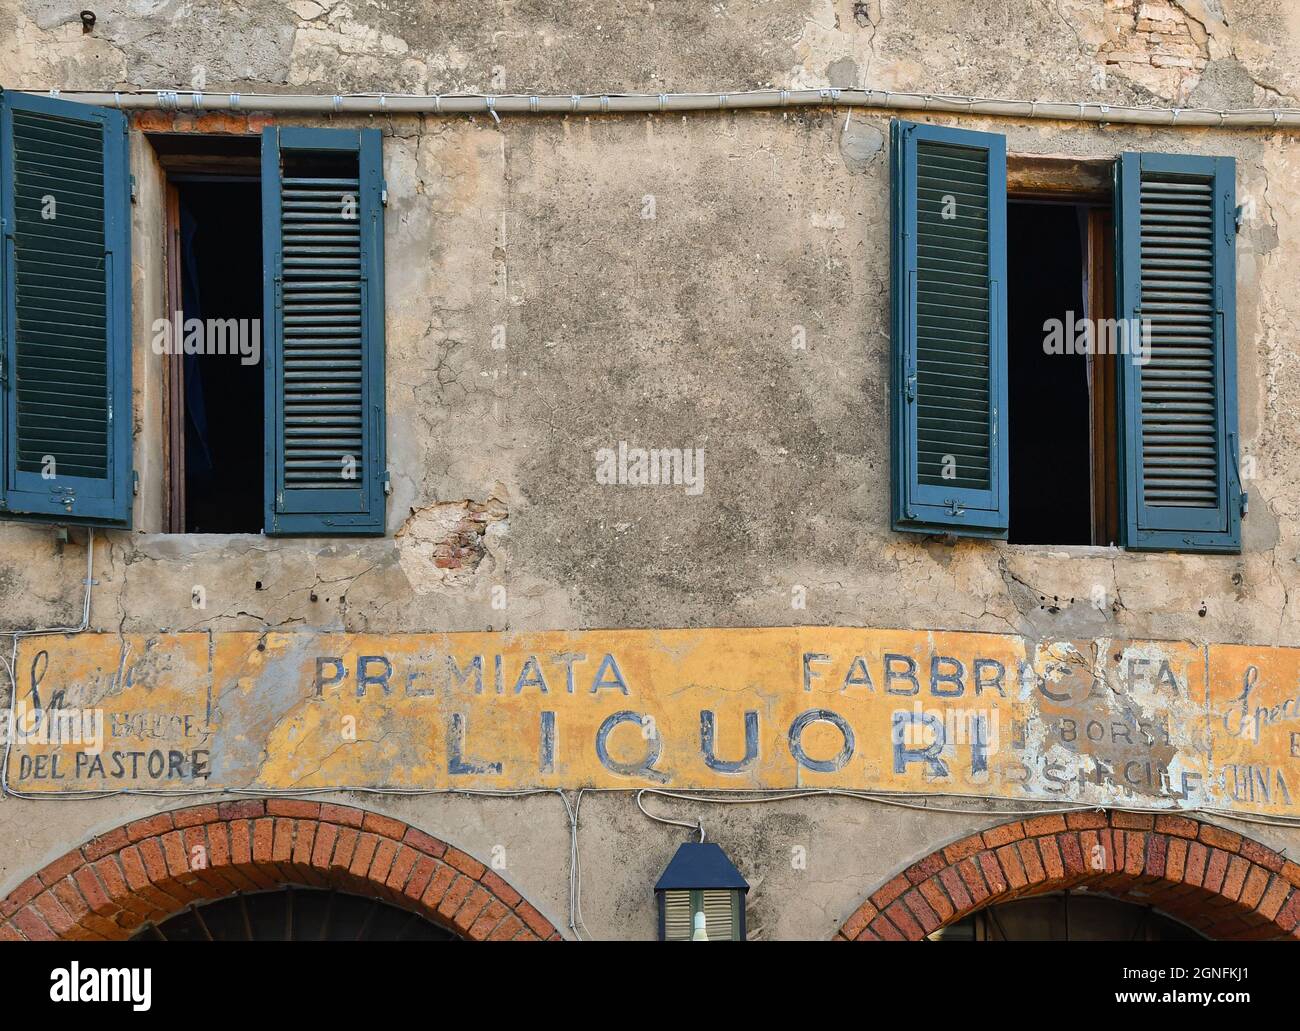 The faded sign of the historic liquor distillery 'Emilio Borsi', founded in 1800 in the old town of Castagneto Carducci, Livorno, Tuscany Stock Photo